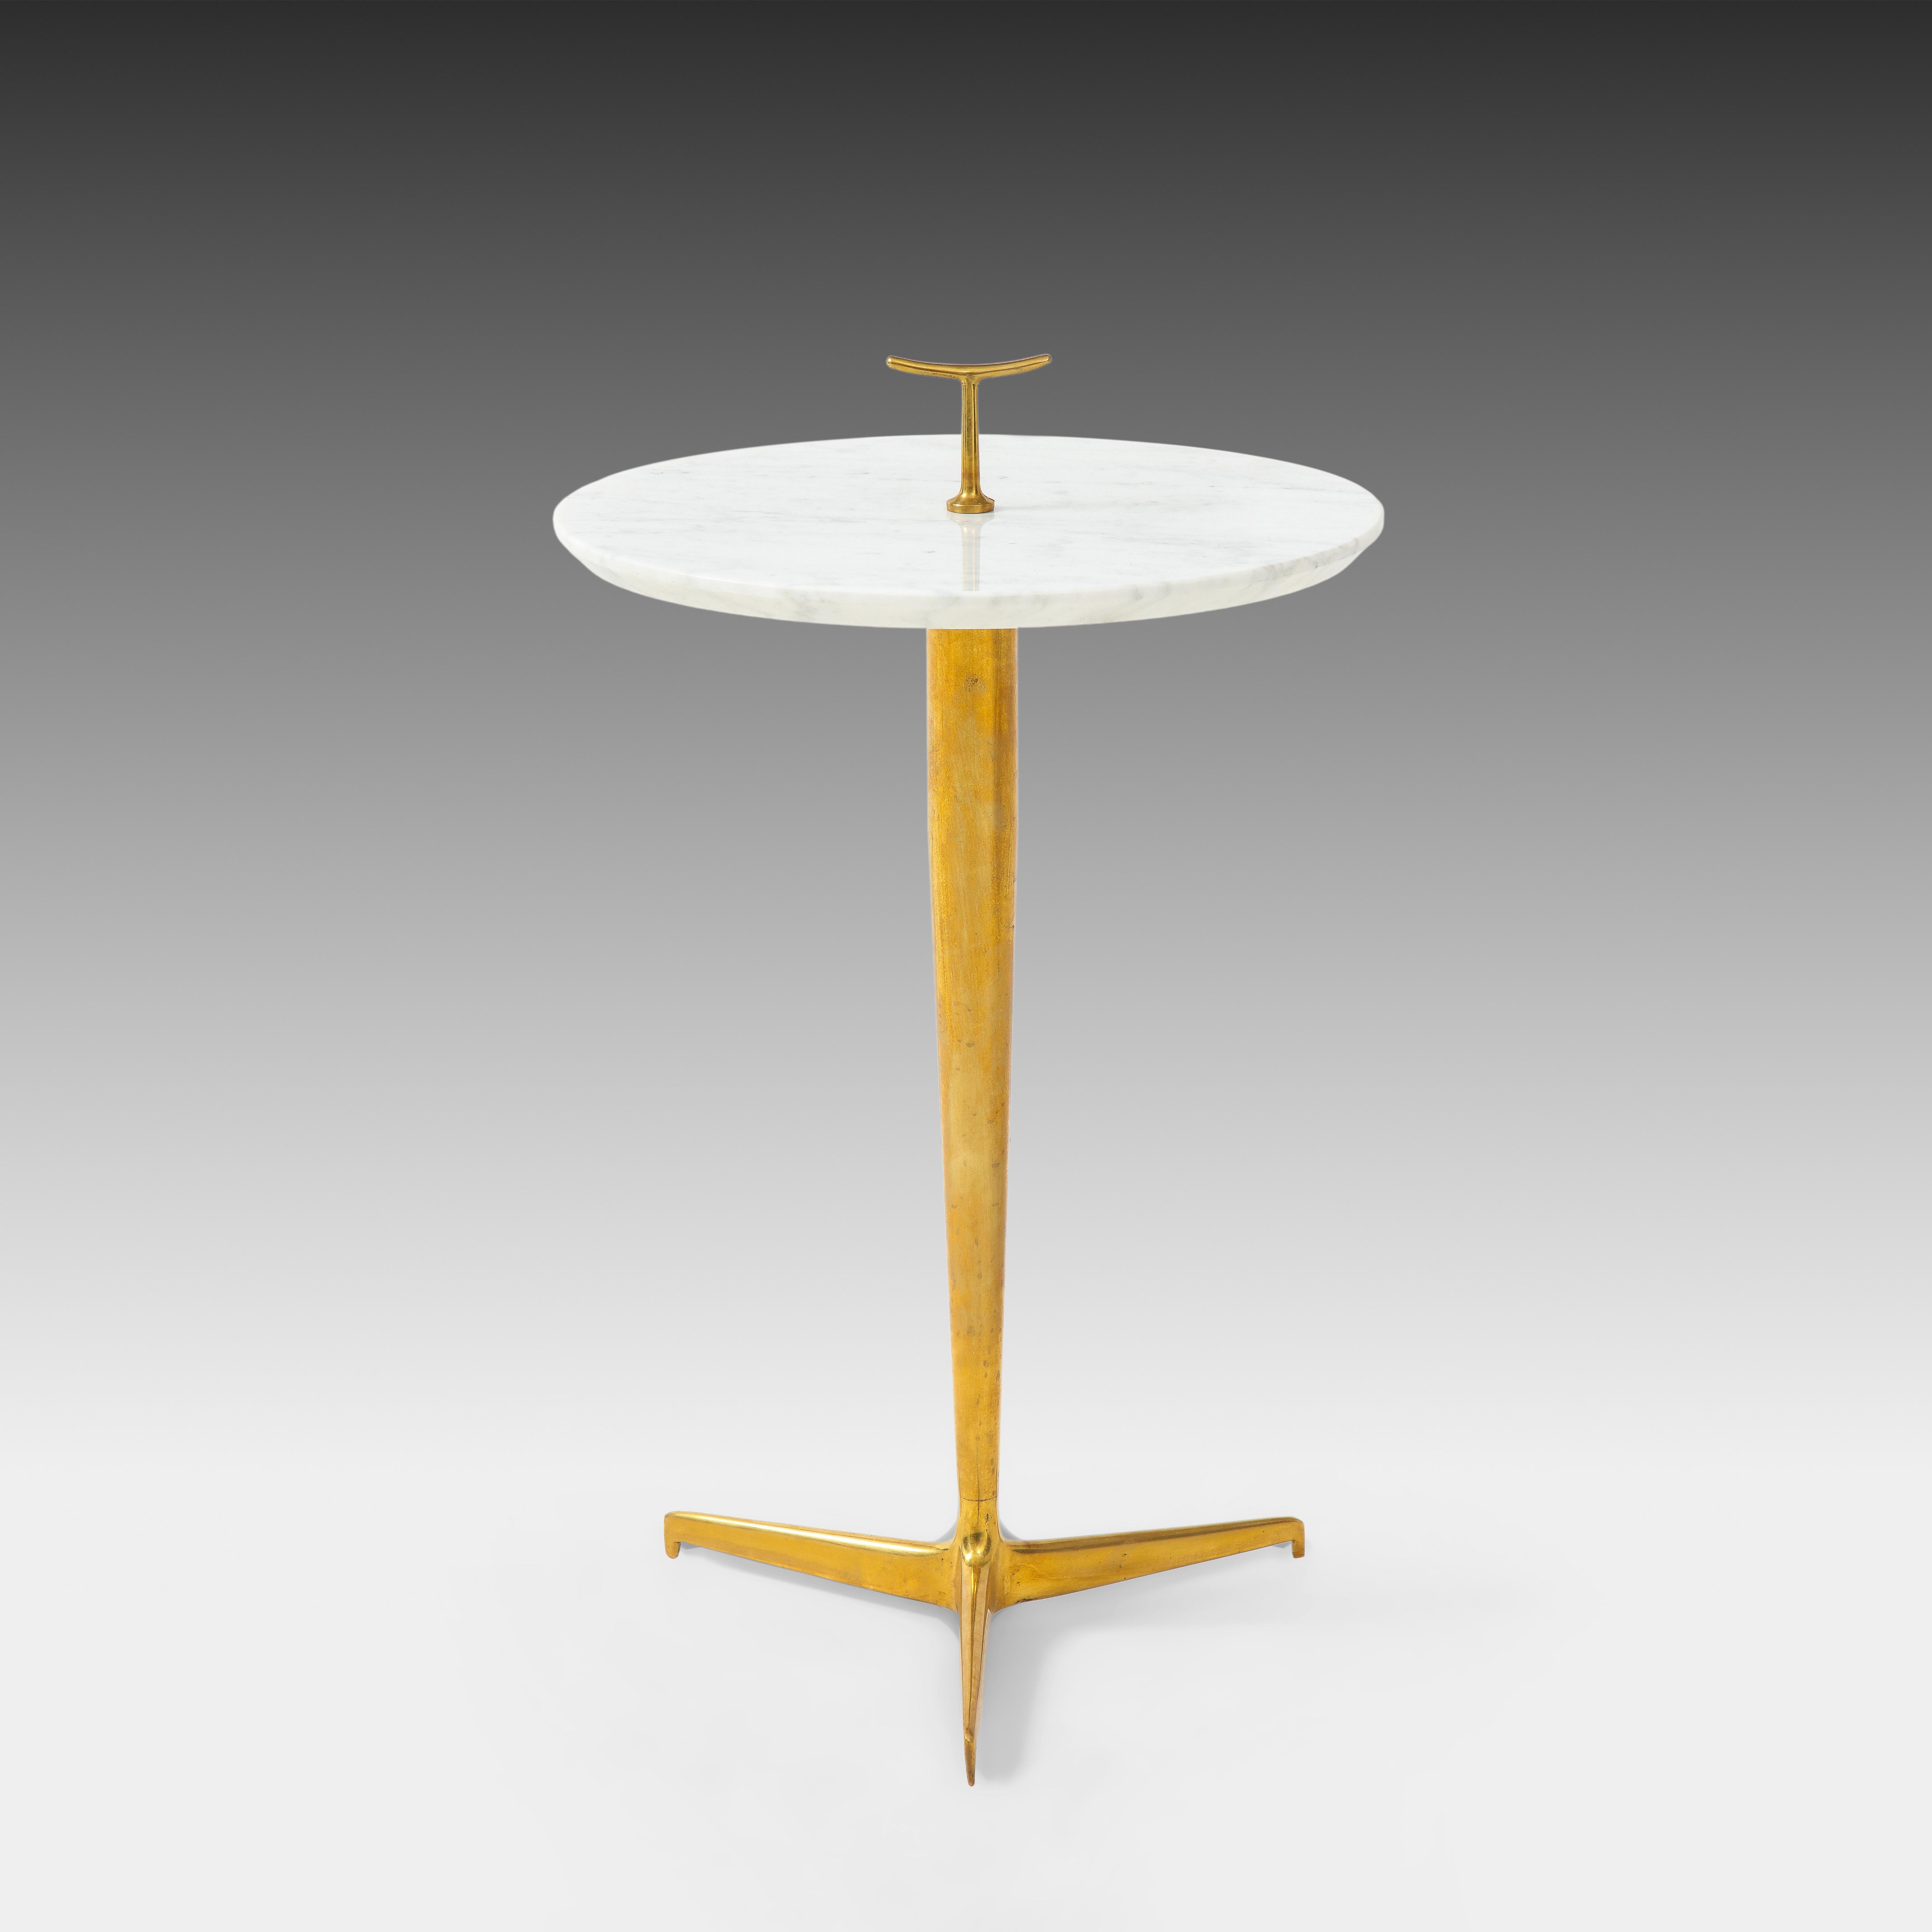 Contemporary side or drinks table in thick Carrara marble with small brass handle detail on patinated brass tripod base, Italy, 2022. This chic modern side table is beautifully constructed with thick reverse rounded Carrara marble top and richly